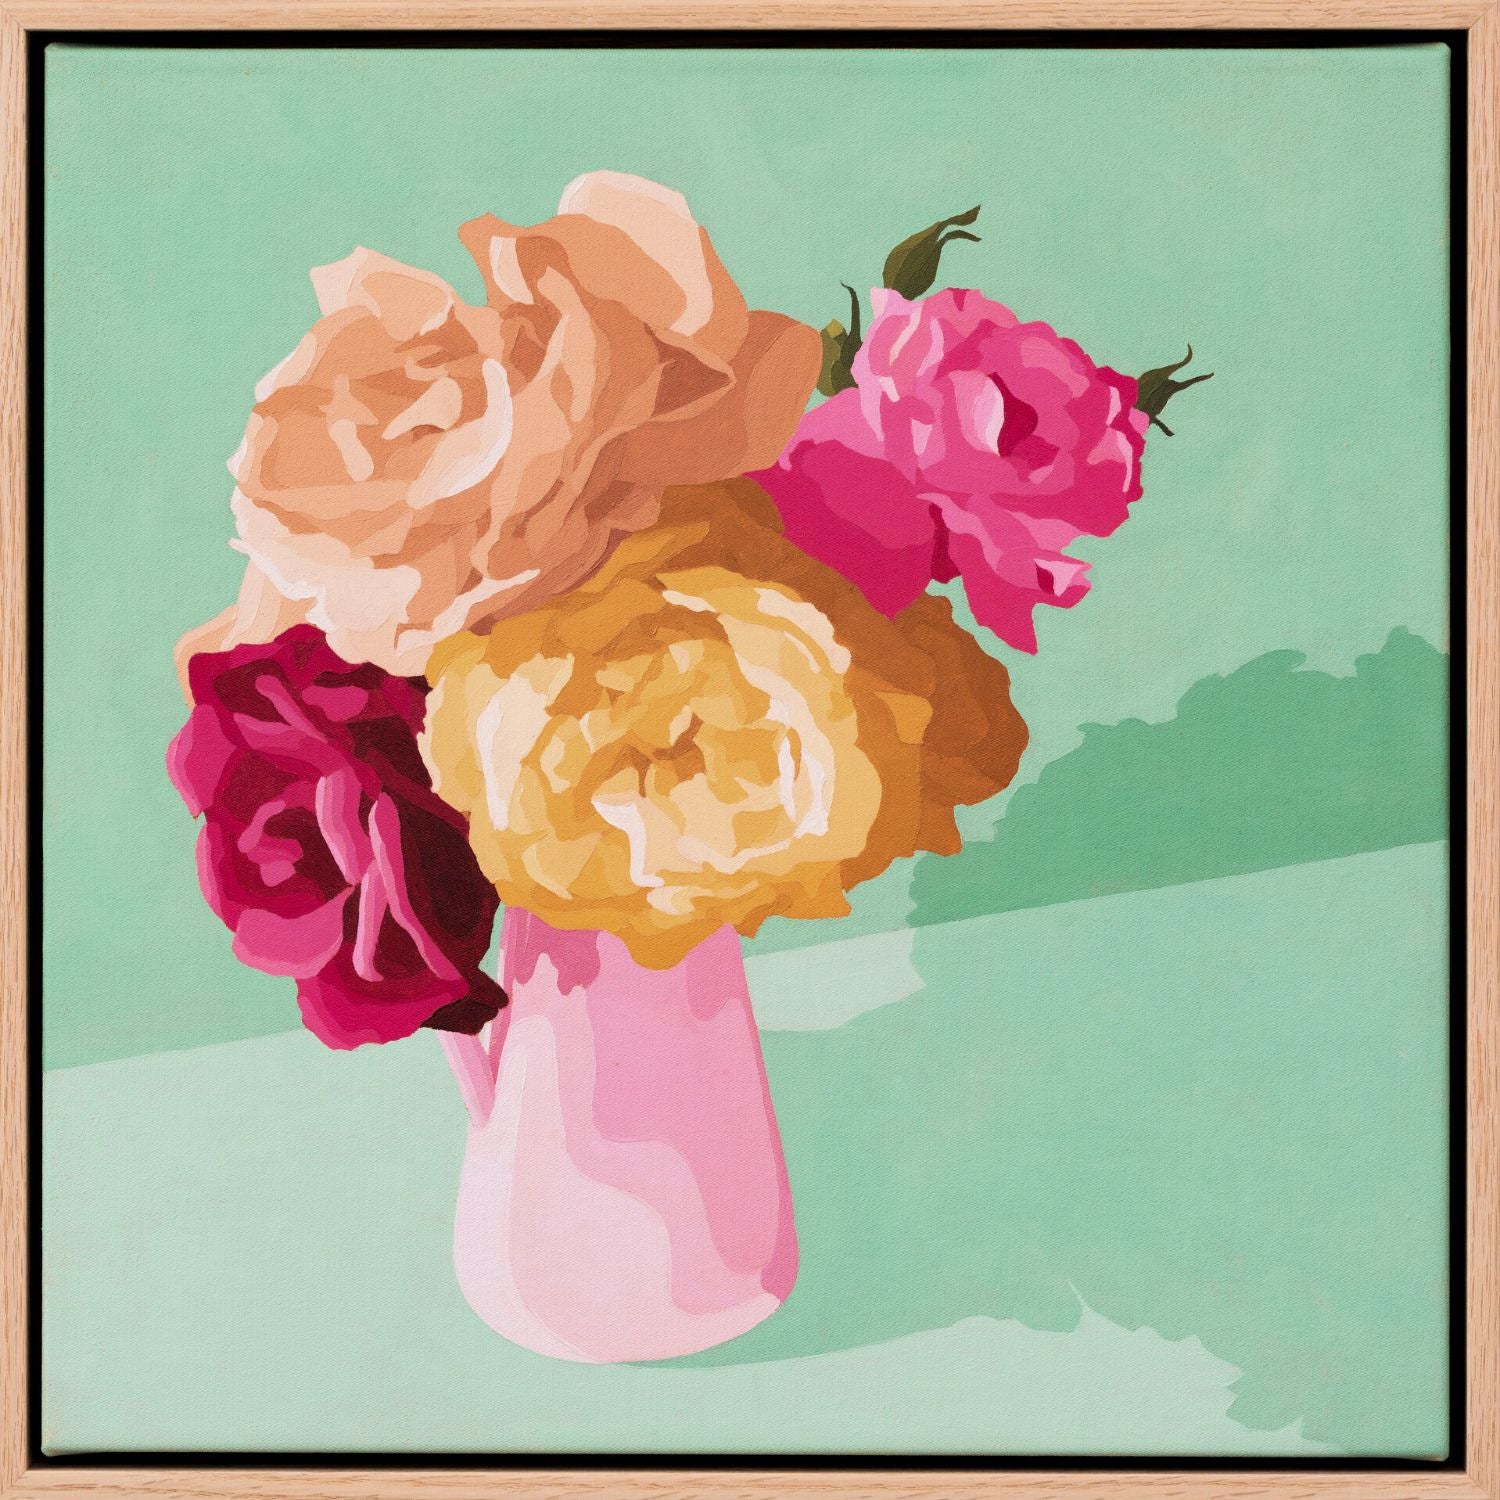 original oil painting of roses on a vase with a soft aqua background